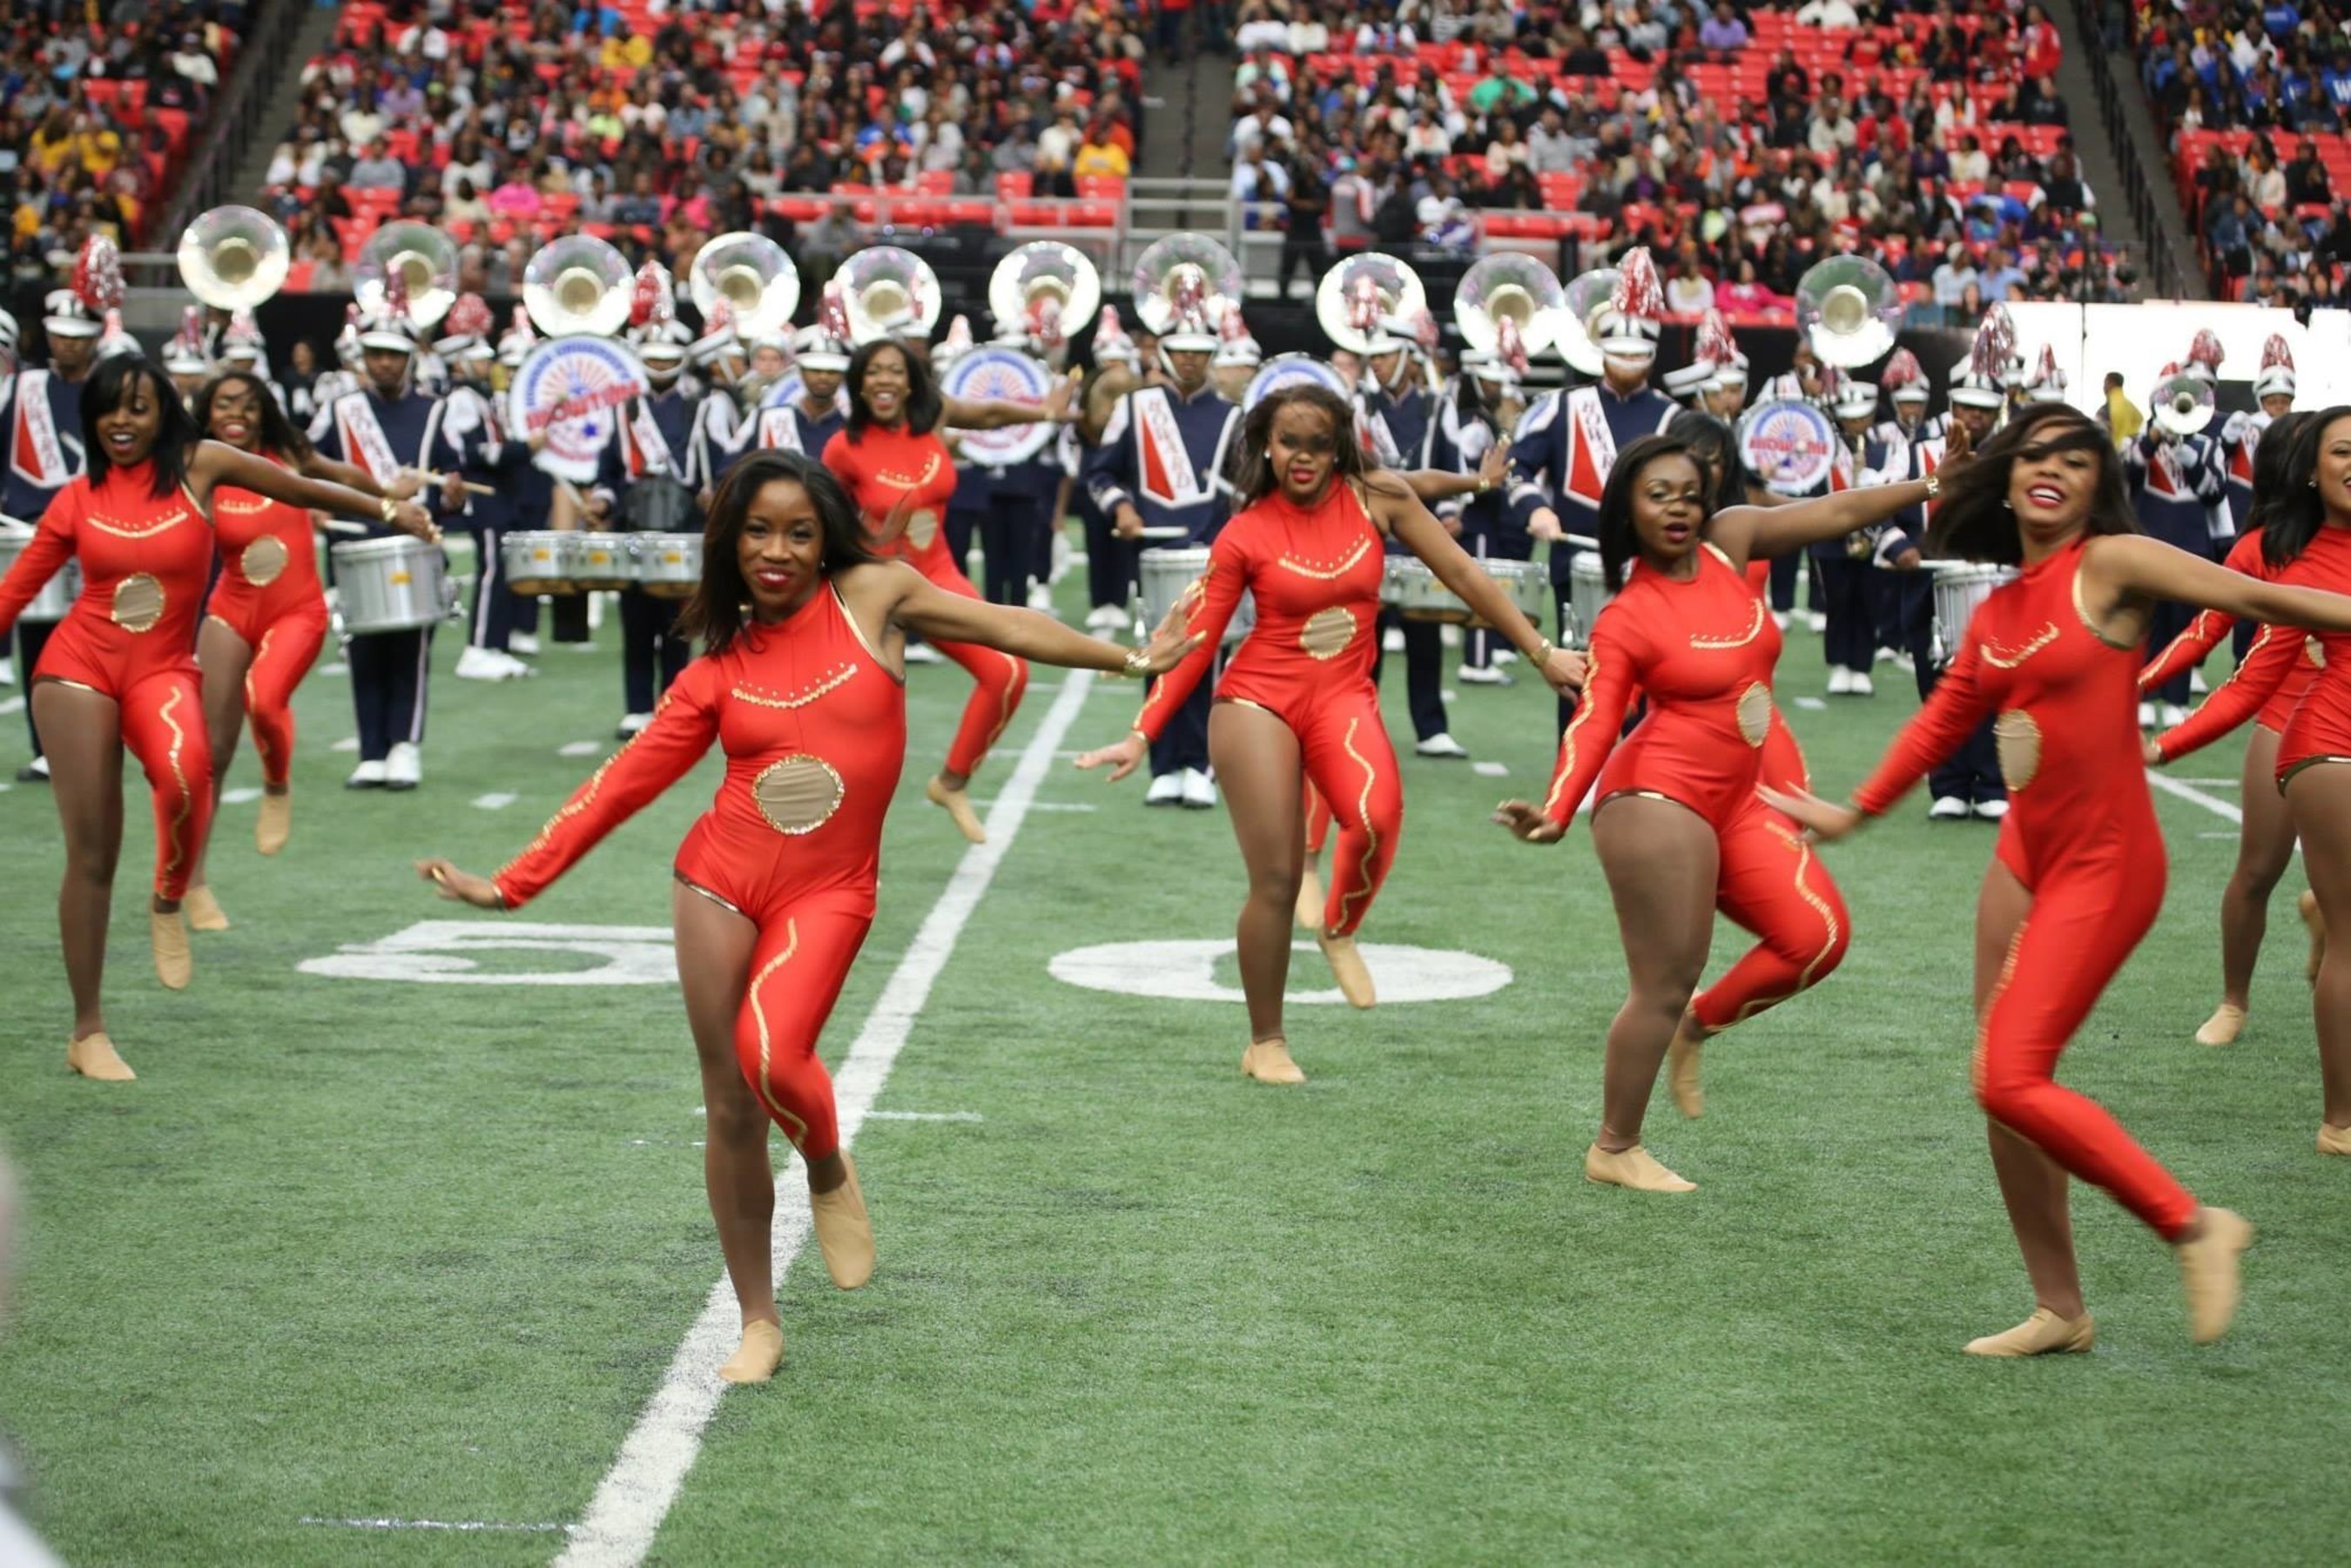 The Howard University "Showtime" Marching Band showcase their electrifying musical talent at the 13th annual Honda Battle of the Bands Invitational Showcase on Jan. 24, 2015